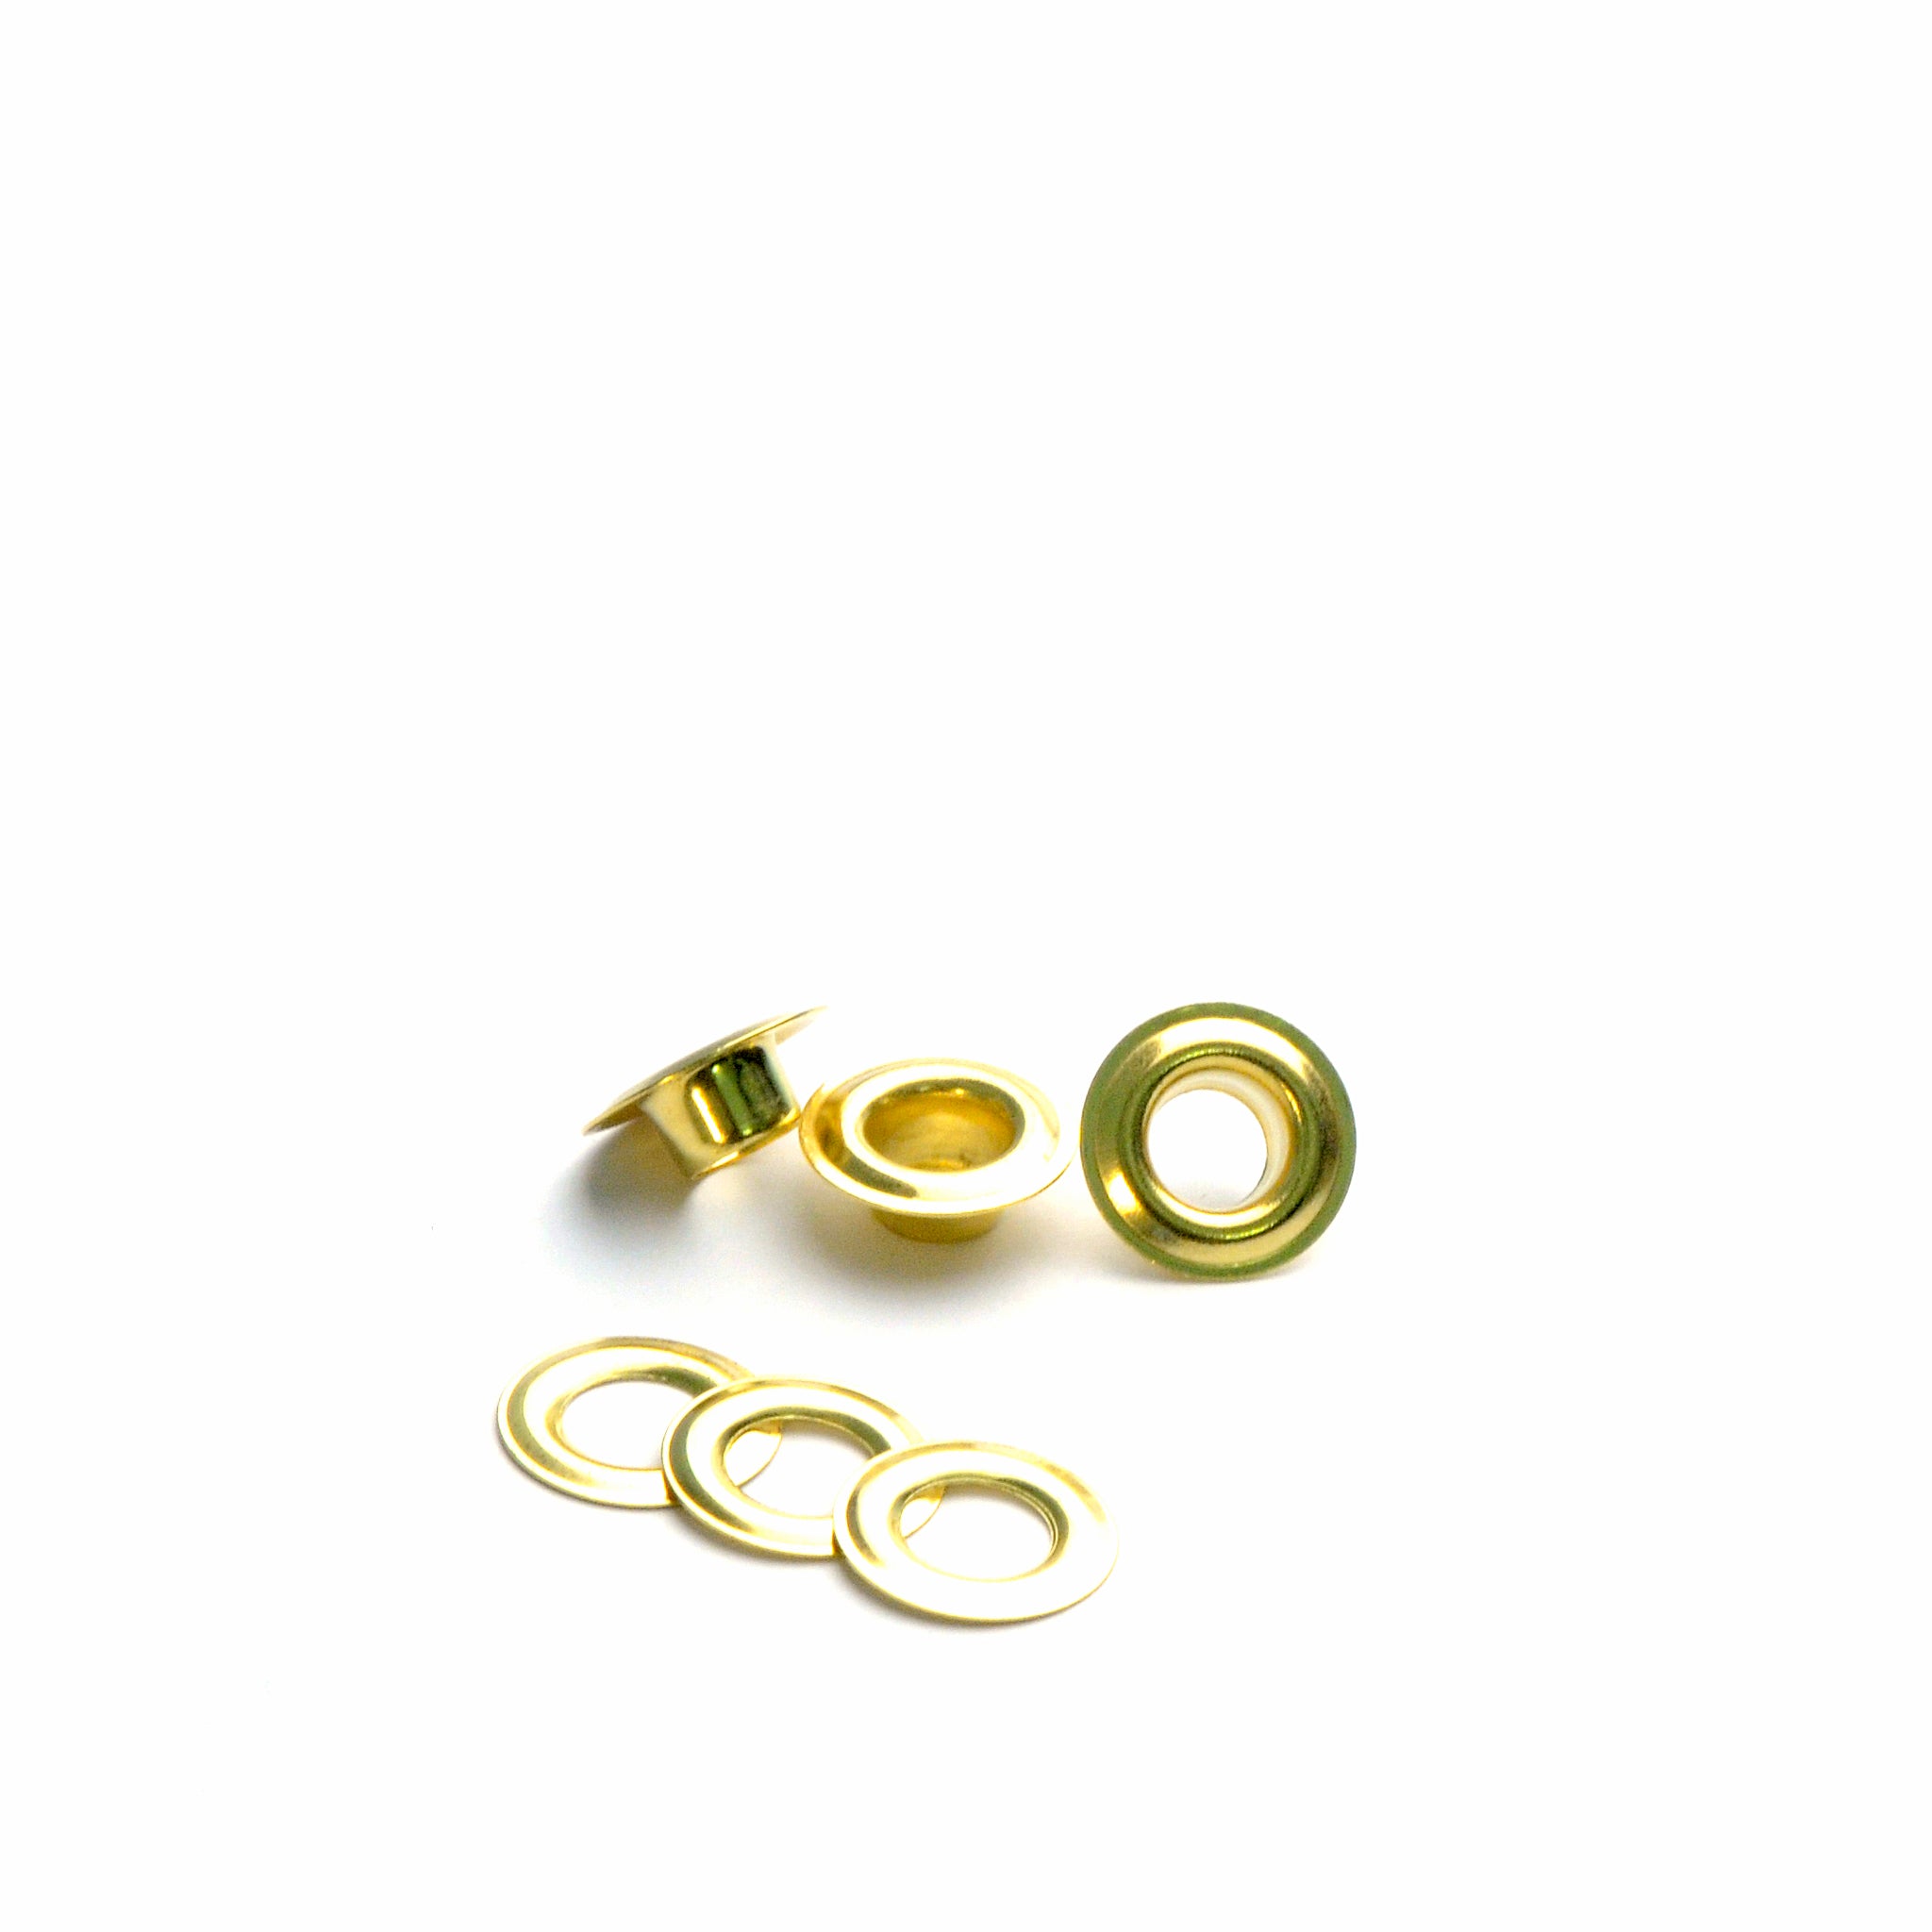 Solid Brass Extra Long Solid Brass Grommets (Eyelet and Washer) from Identity Leathercraft